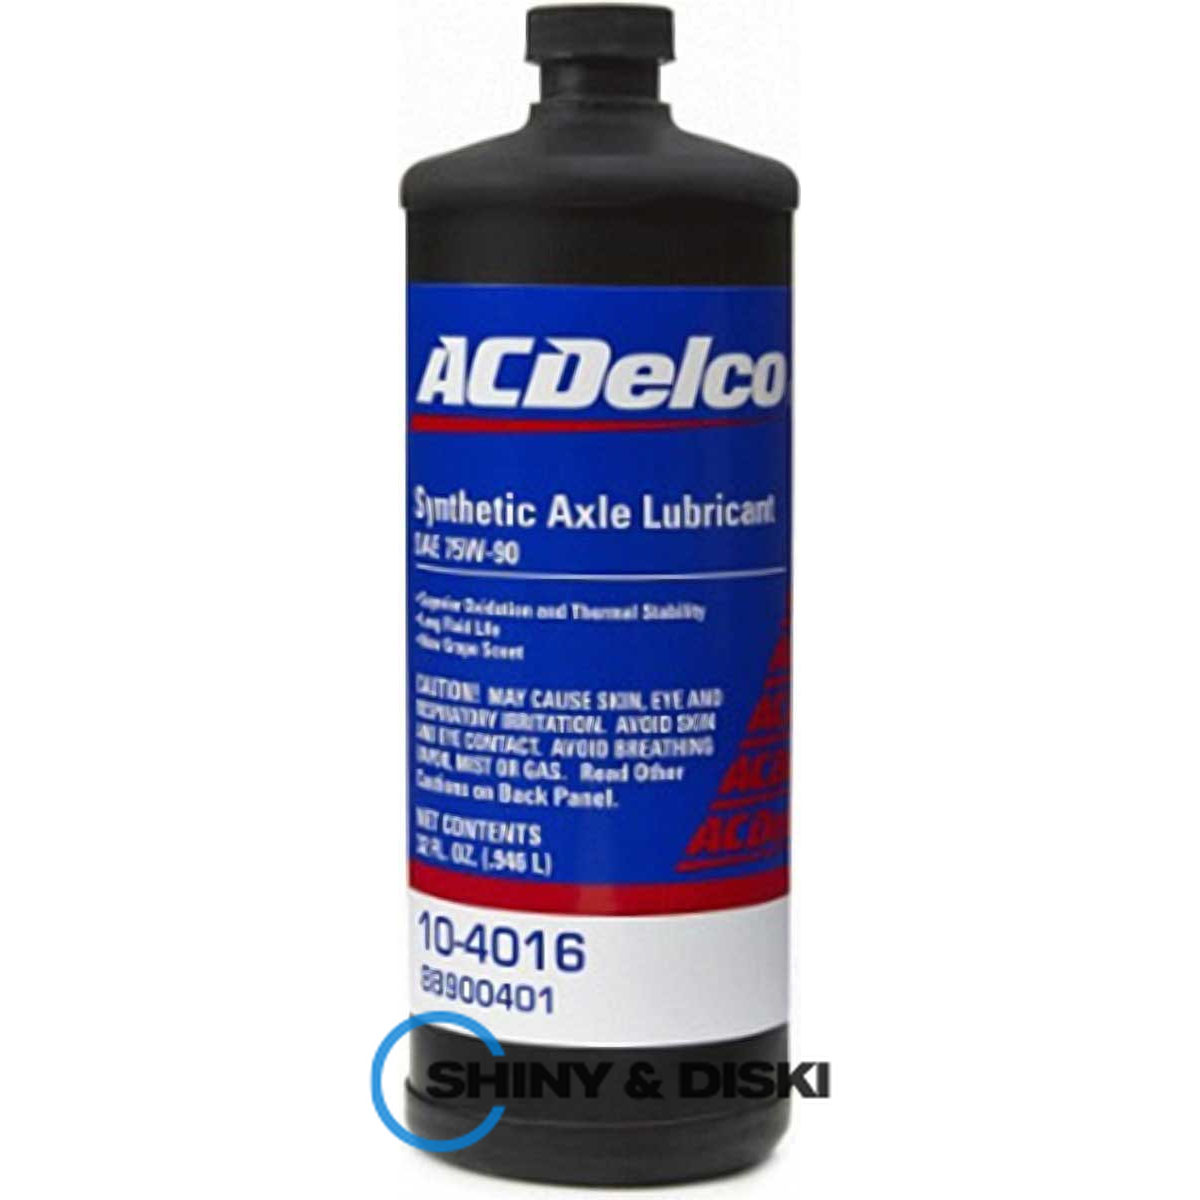 acdelco synthetic axle lubricant